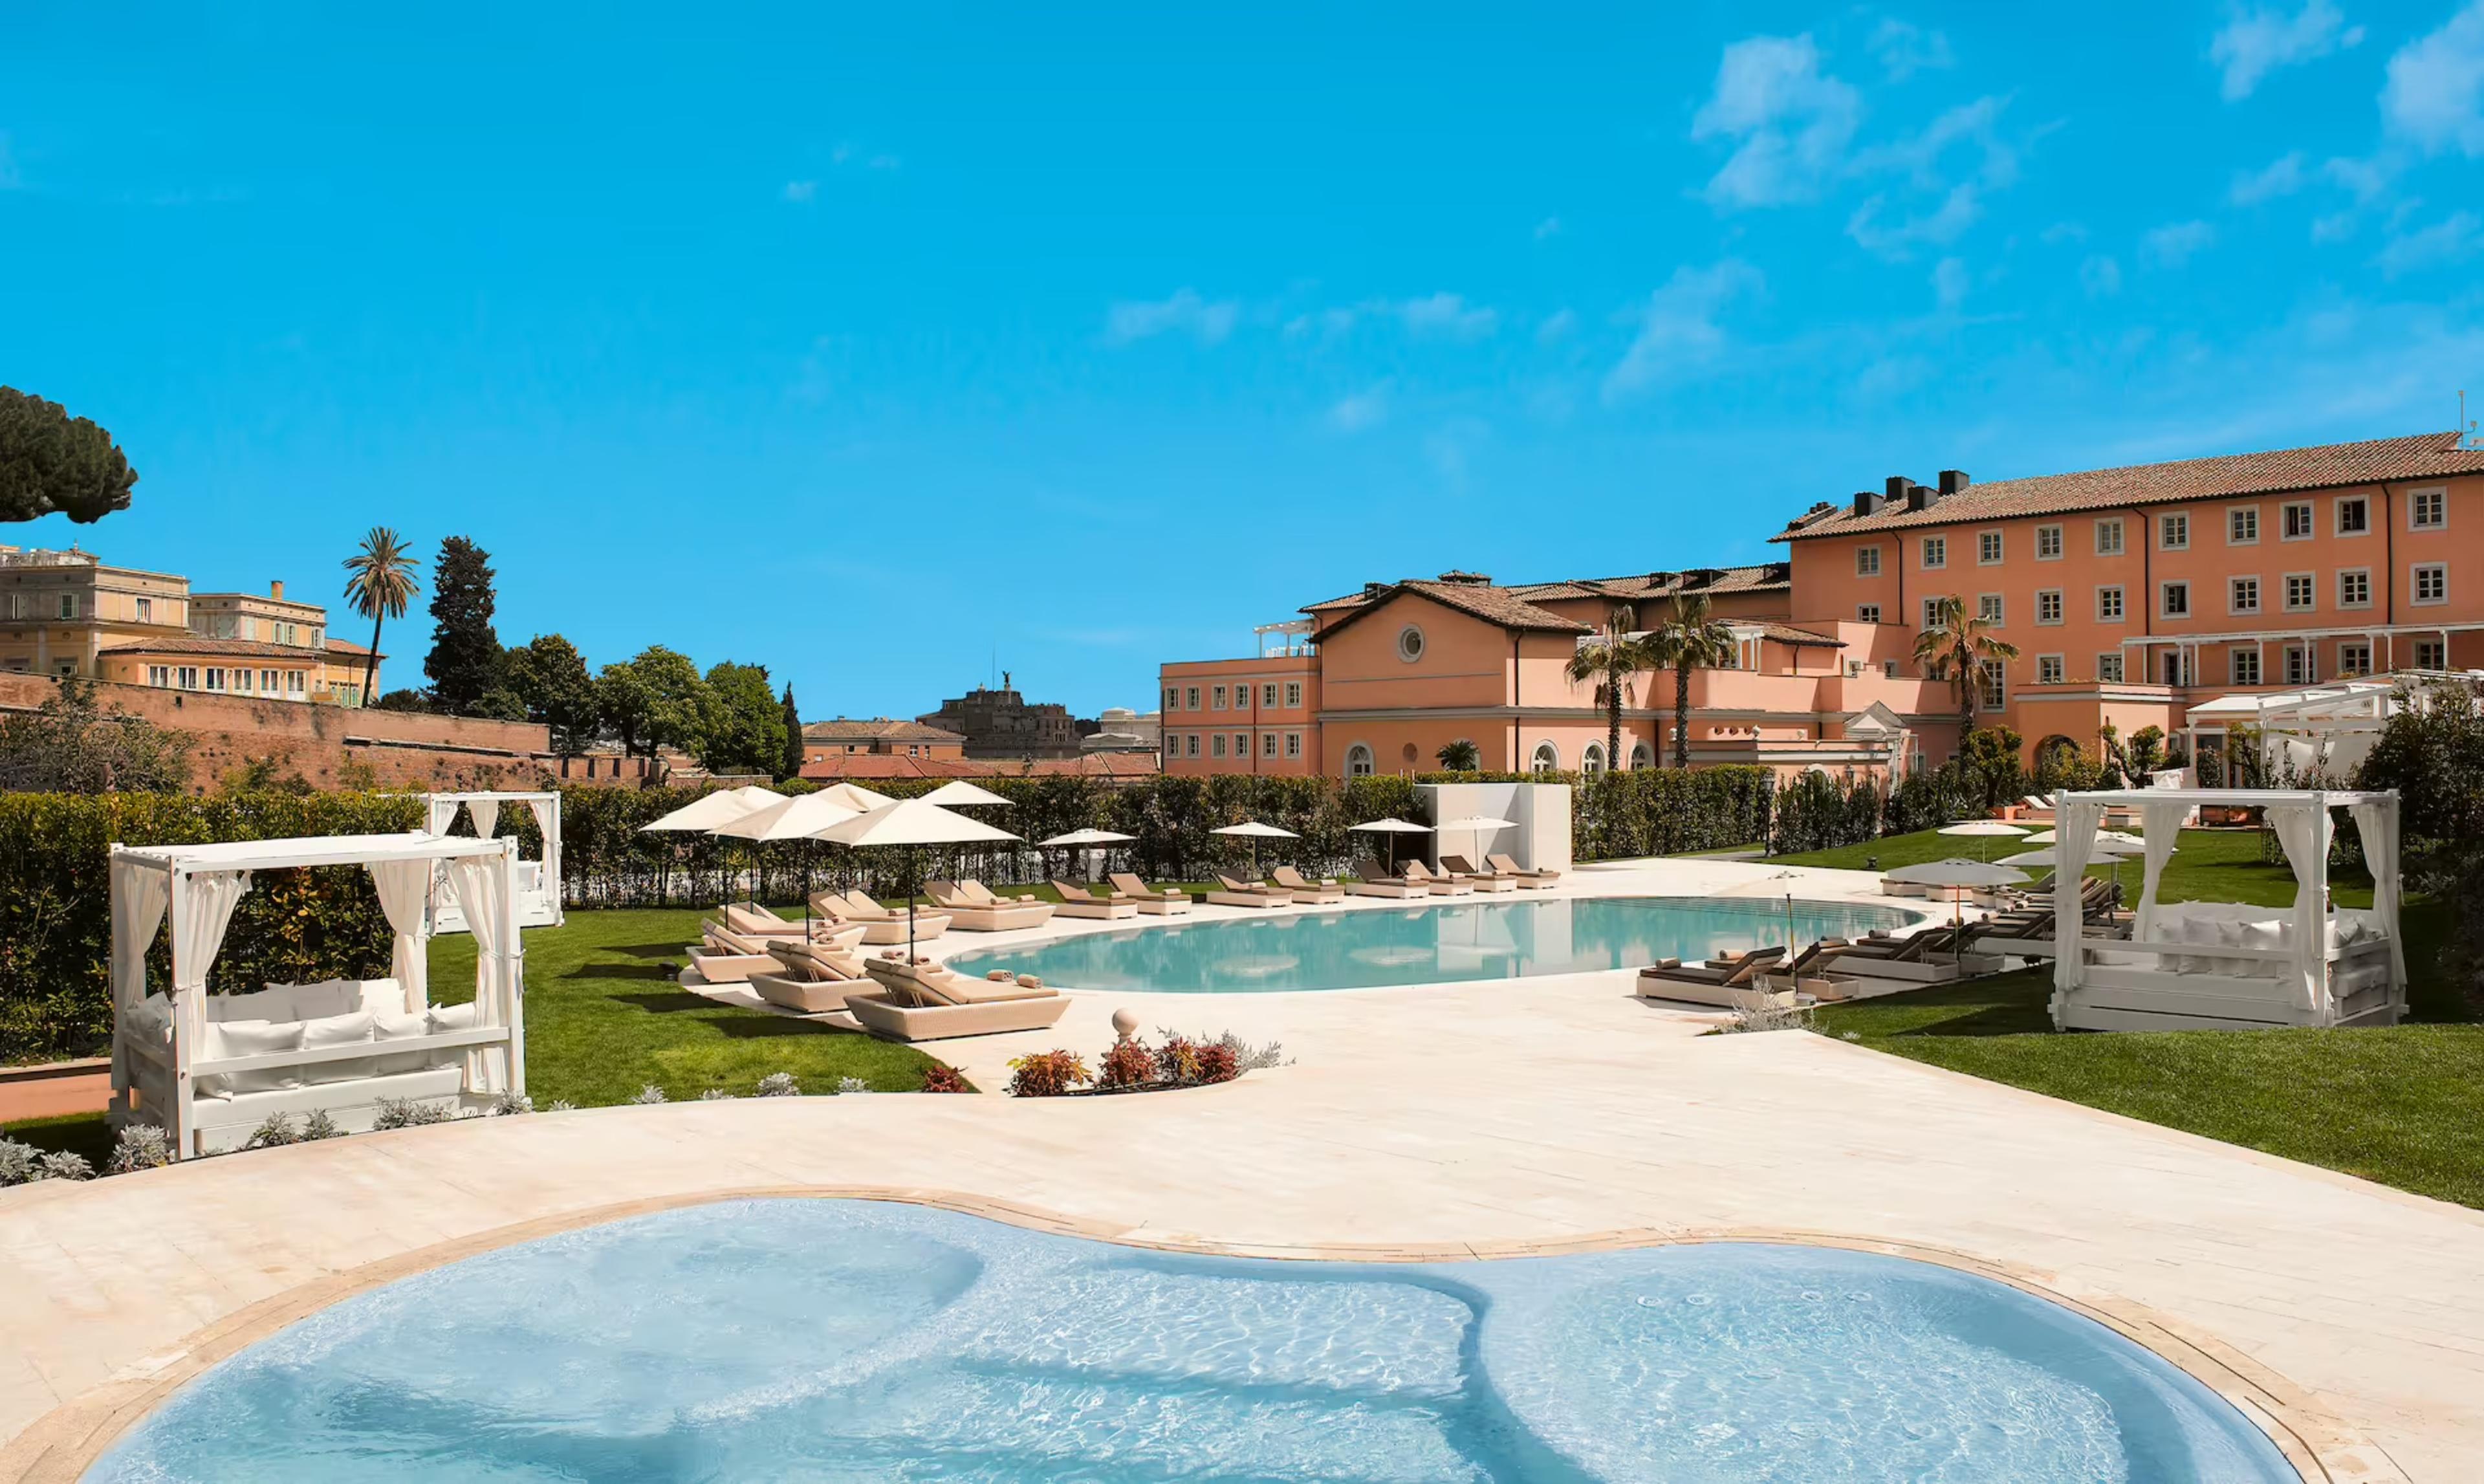 Villa Agrippina Gran Meliá - The Leading Hotels of the World